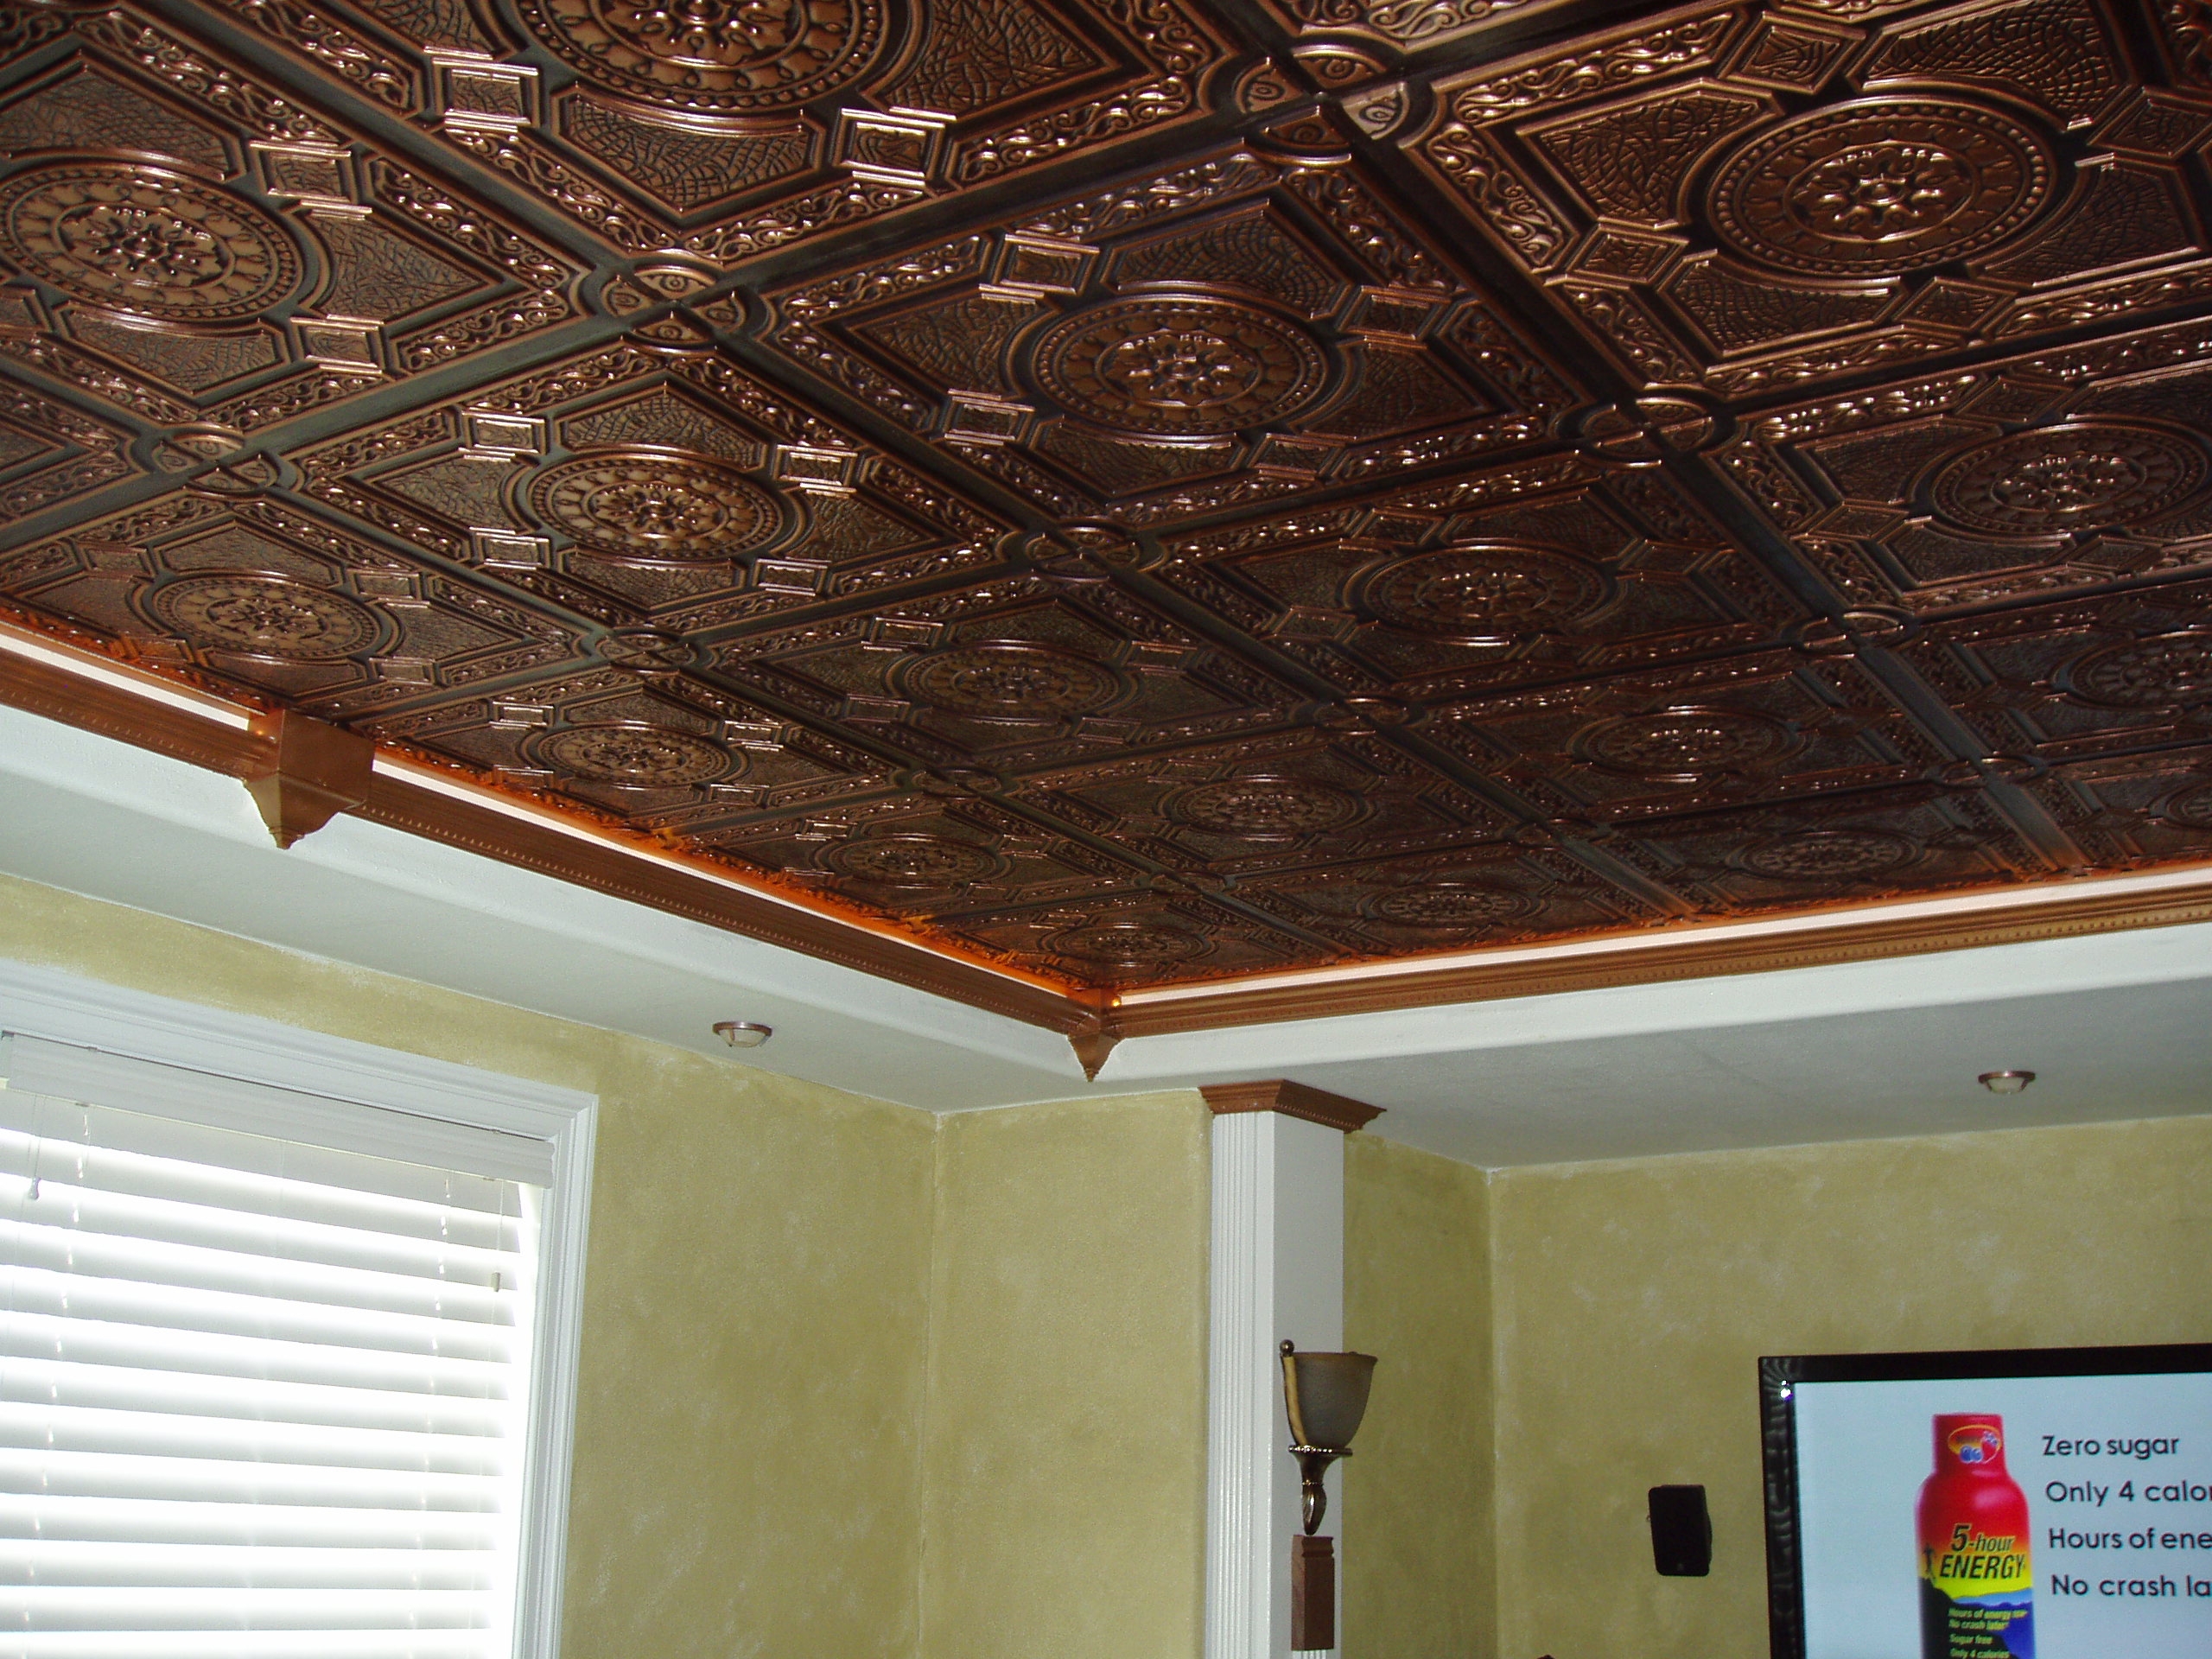 Permalink to Small Decorative Ceiling Tiles